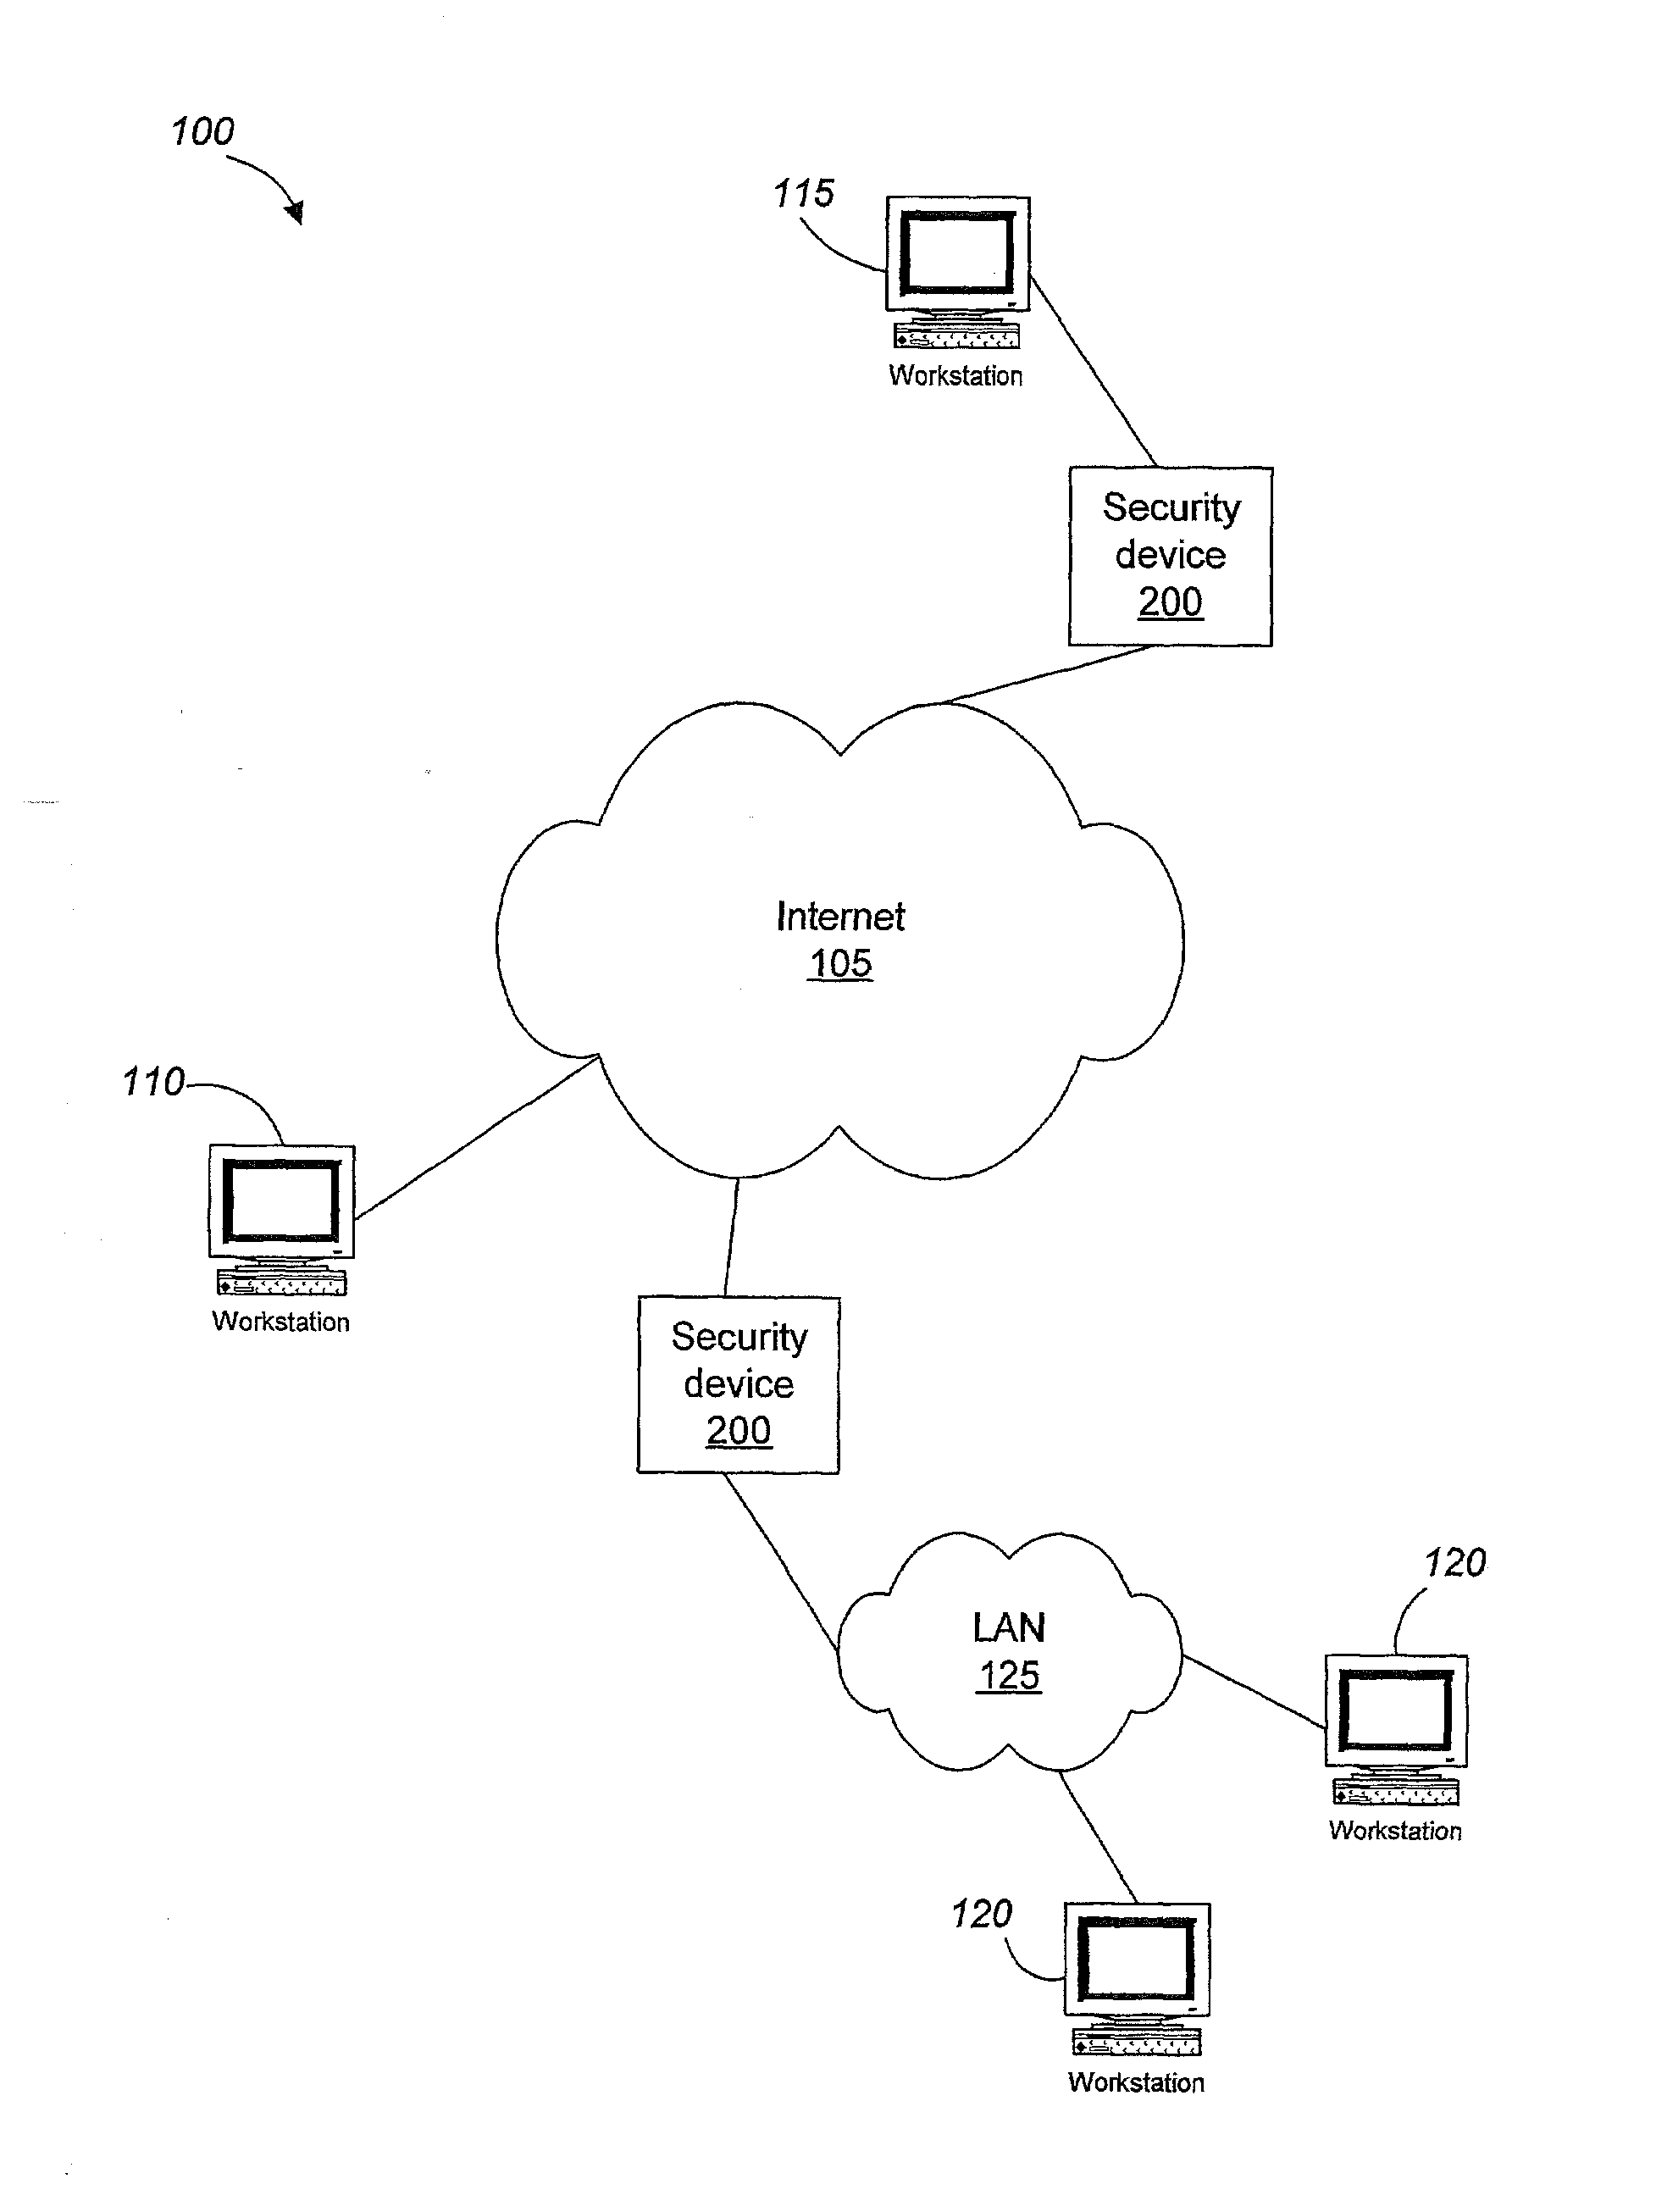 Network security device